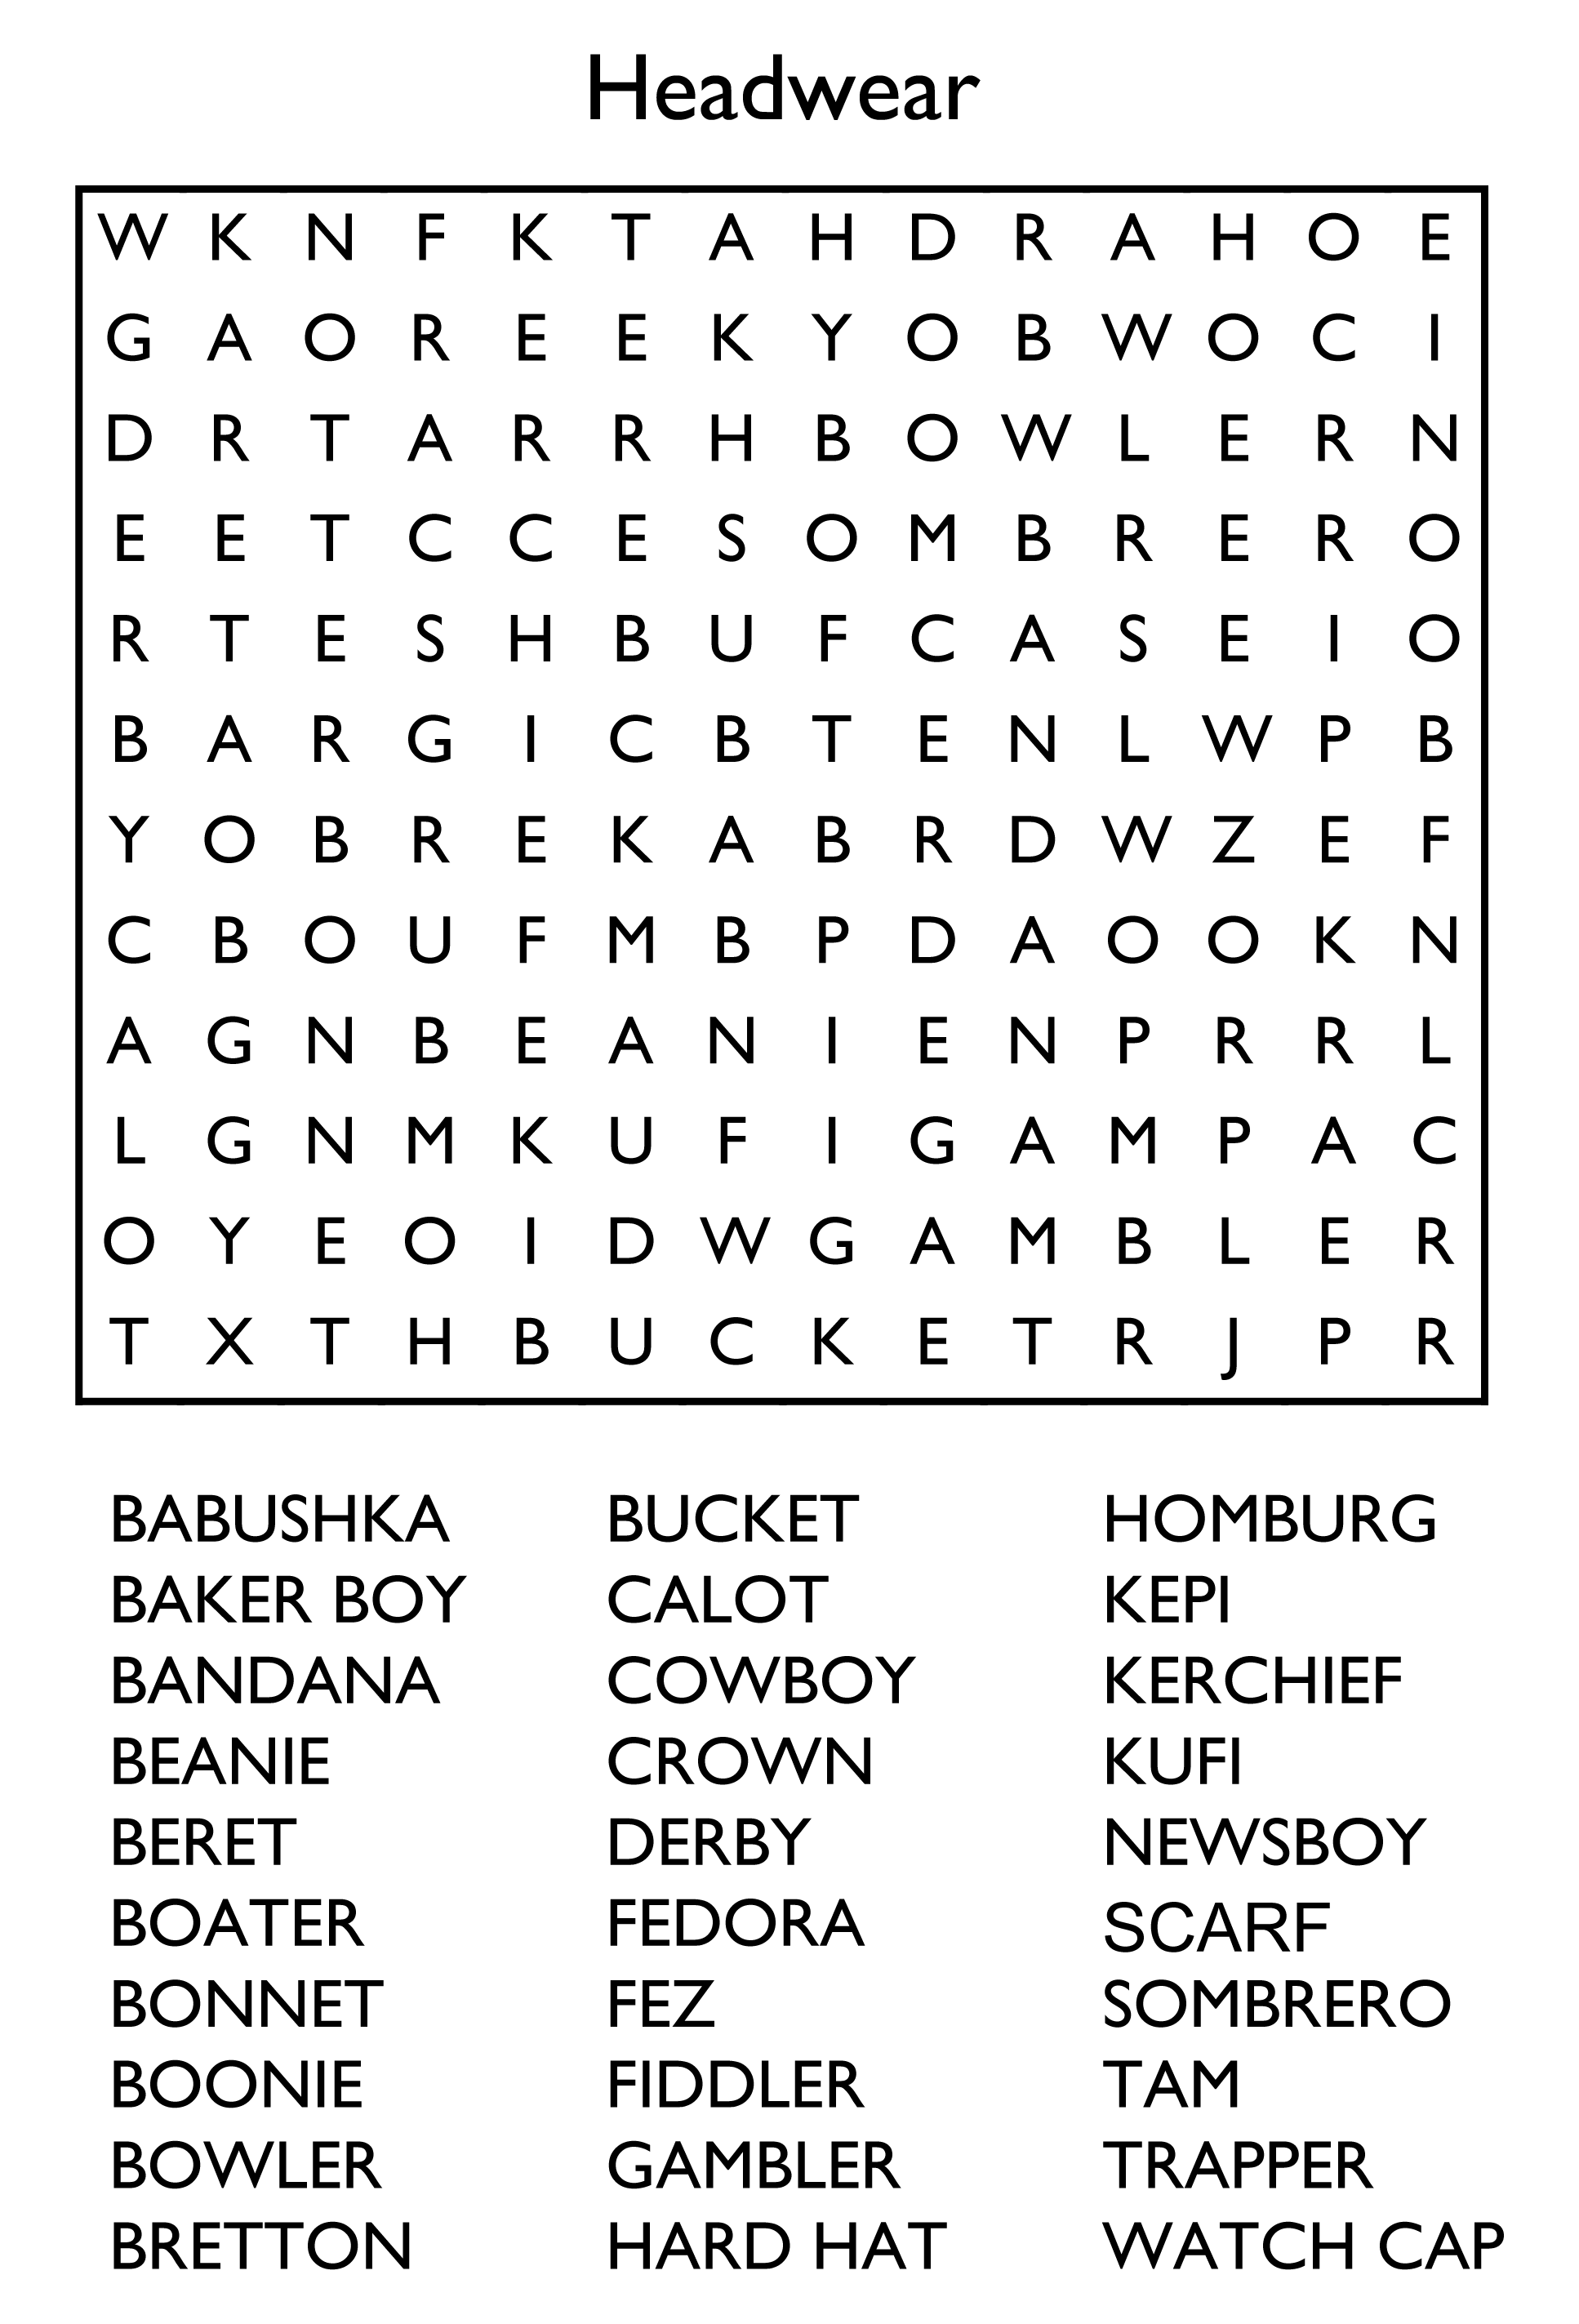 Free Printable Word Search Puzzle - Headwear